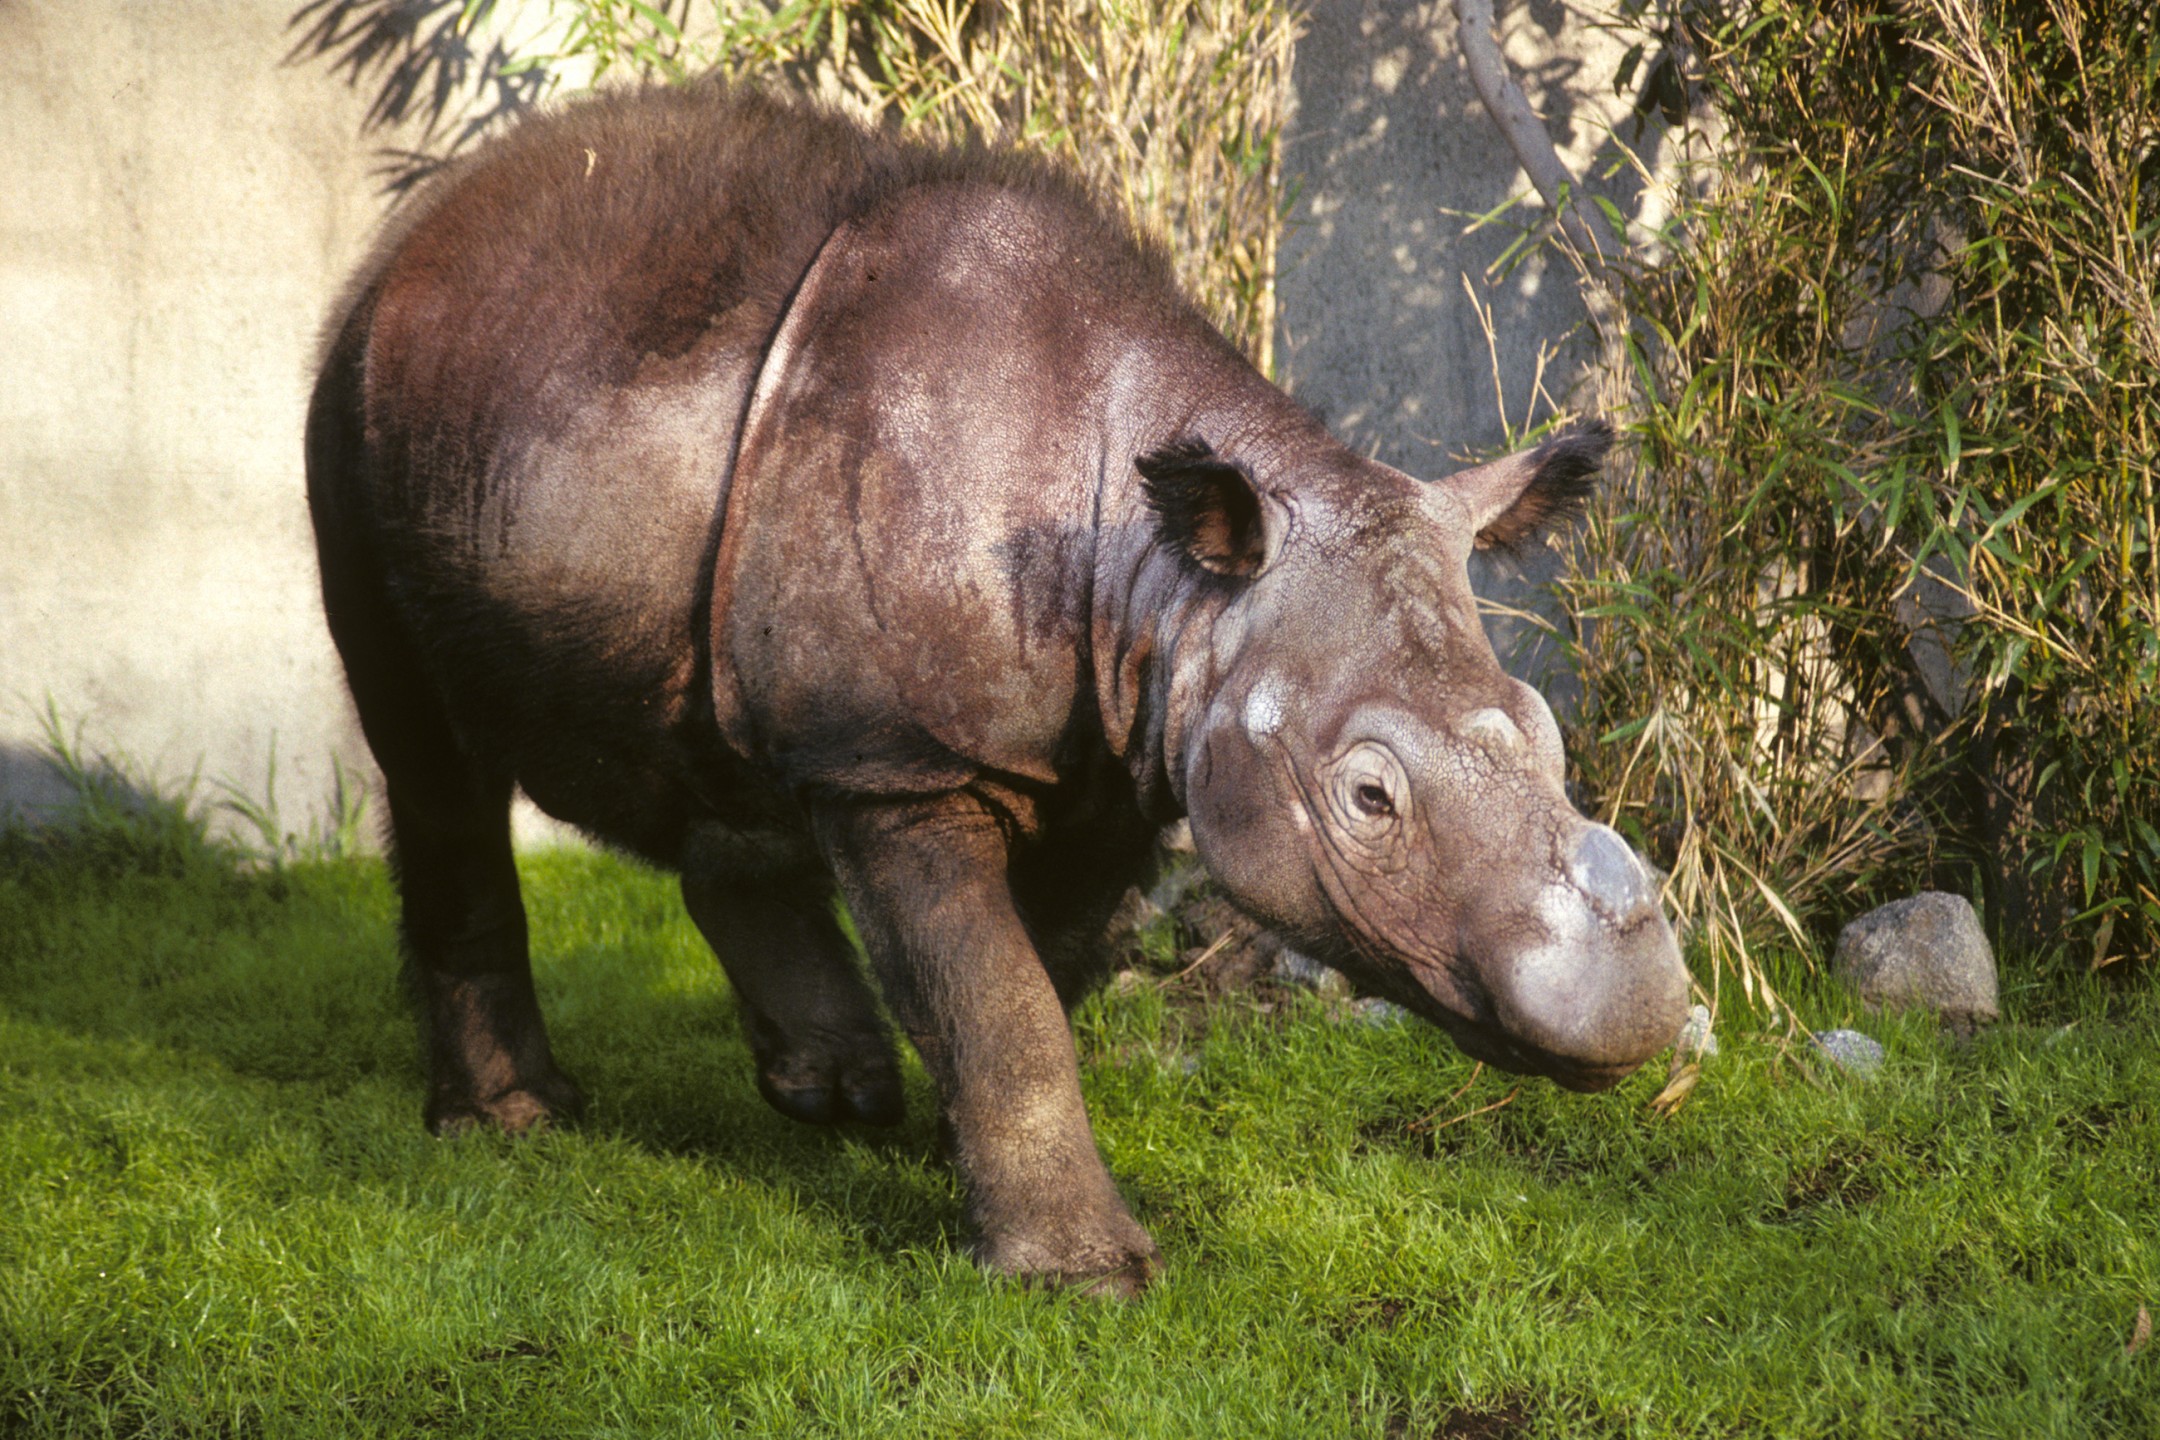 In November 1988, the San Diego Zoo received an unusual rhino species for the first time: the Sumatran rhinoceros. Smaller than other rhinos, reddish in color, and, surprisingly, sporting patches of long, fuzzy hair, this Indonesian species made a big impression. Named Barakas, after a region in Sumatra, this female rhino came to San Diego as part of a consortium that banded together to try to establish breeding pairs of the critically endangered species. Two pairs would remain in Indonesia, and one pair each would go to San Diego, Los Angeles, Cincinnati, and New York. Barakas made her debut at the San Diego Zoo in February 1989, wallowing in her pool and munching on up to 16 pounds of carefully selected browse each day. She would be joined by a male, Ipuh, in 1991.